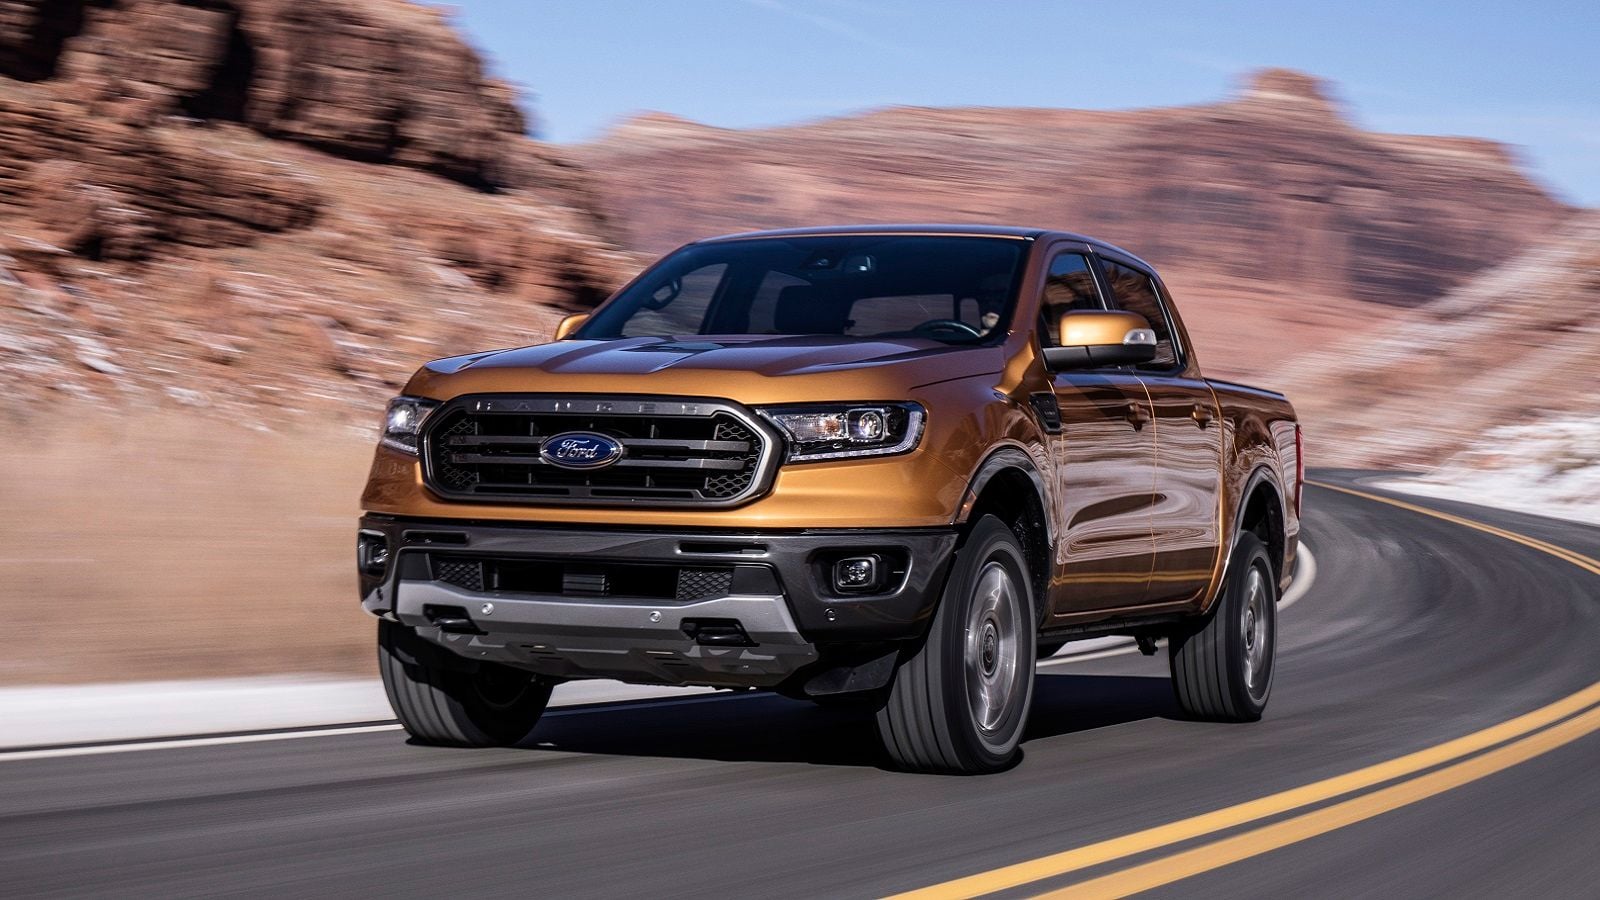 2019 Ford Ranger Will Go On Sale With Endless Accessories